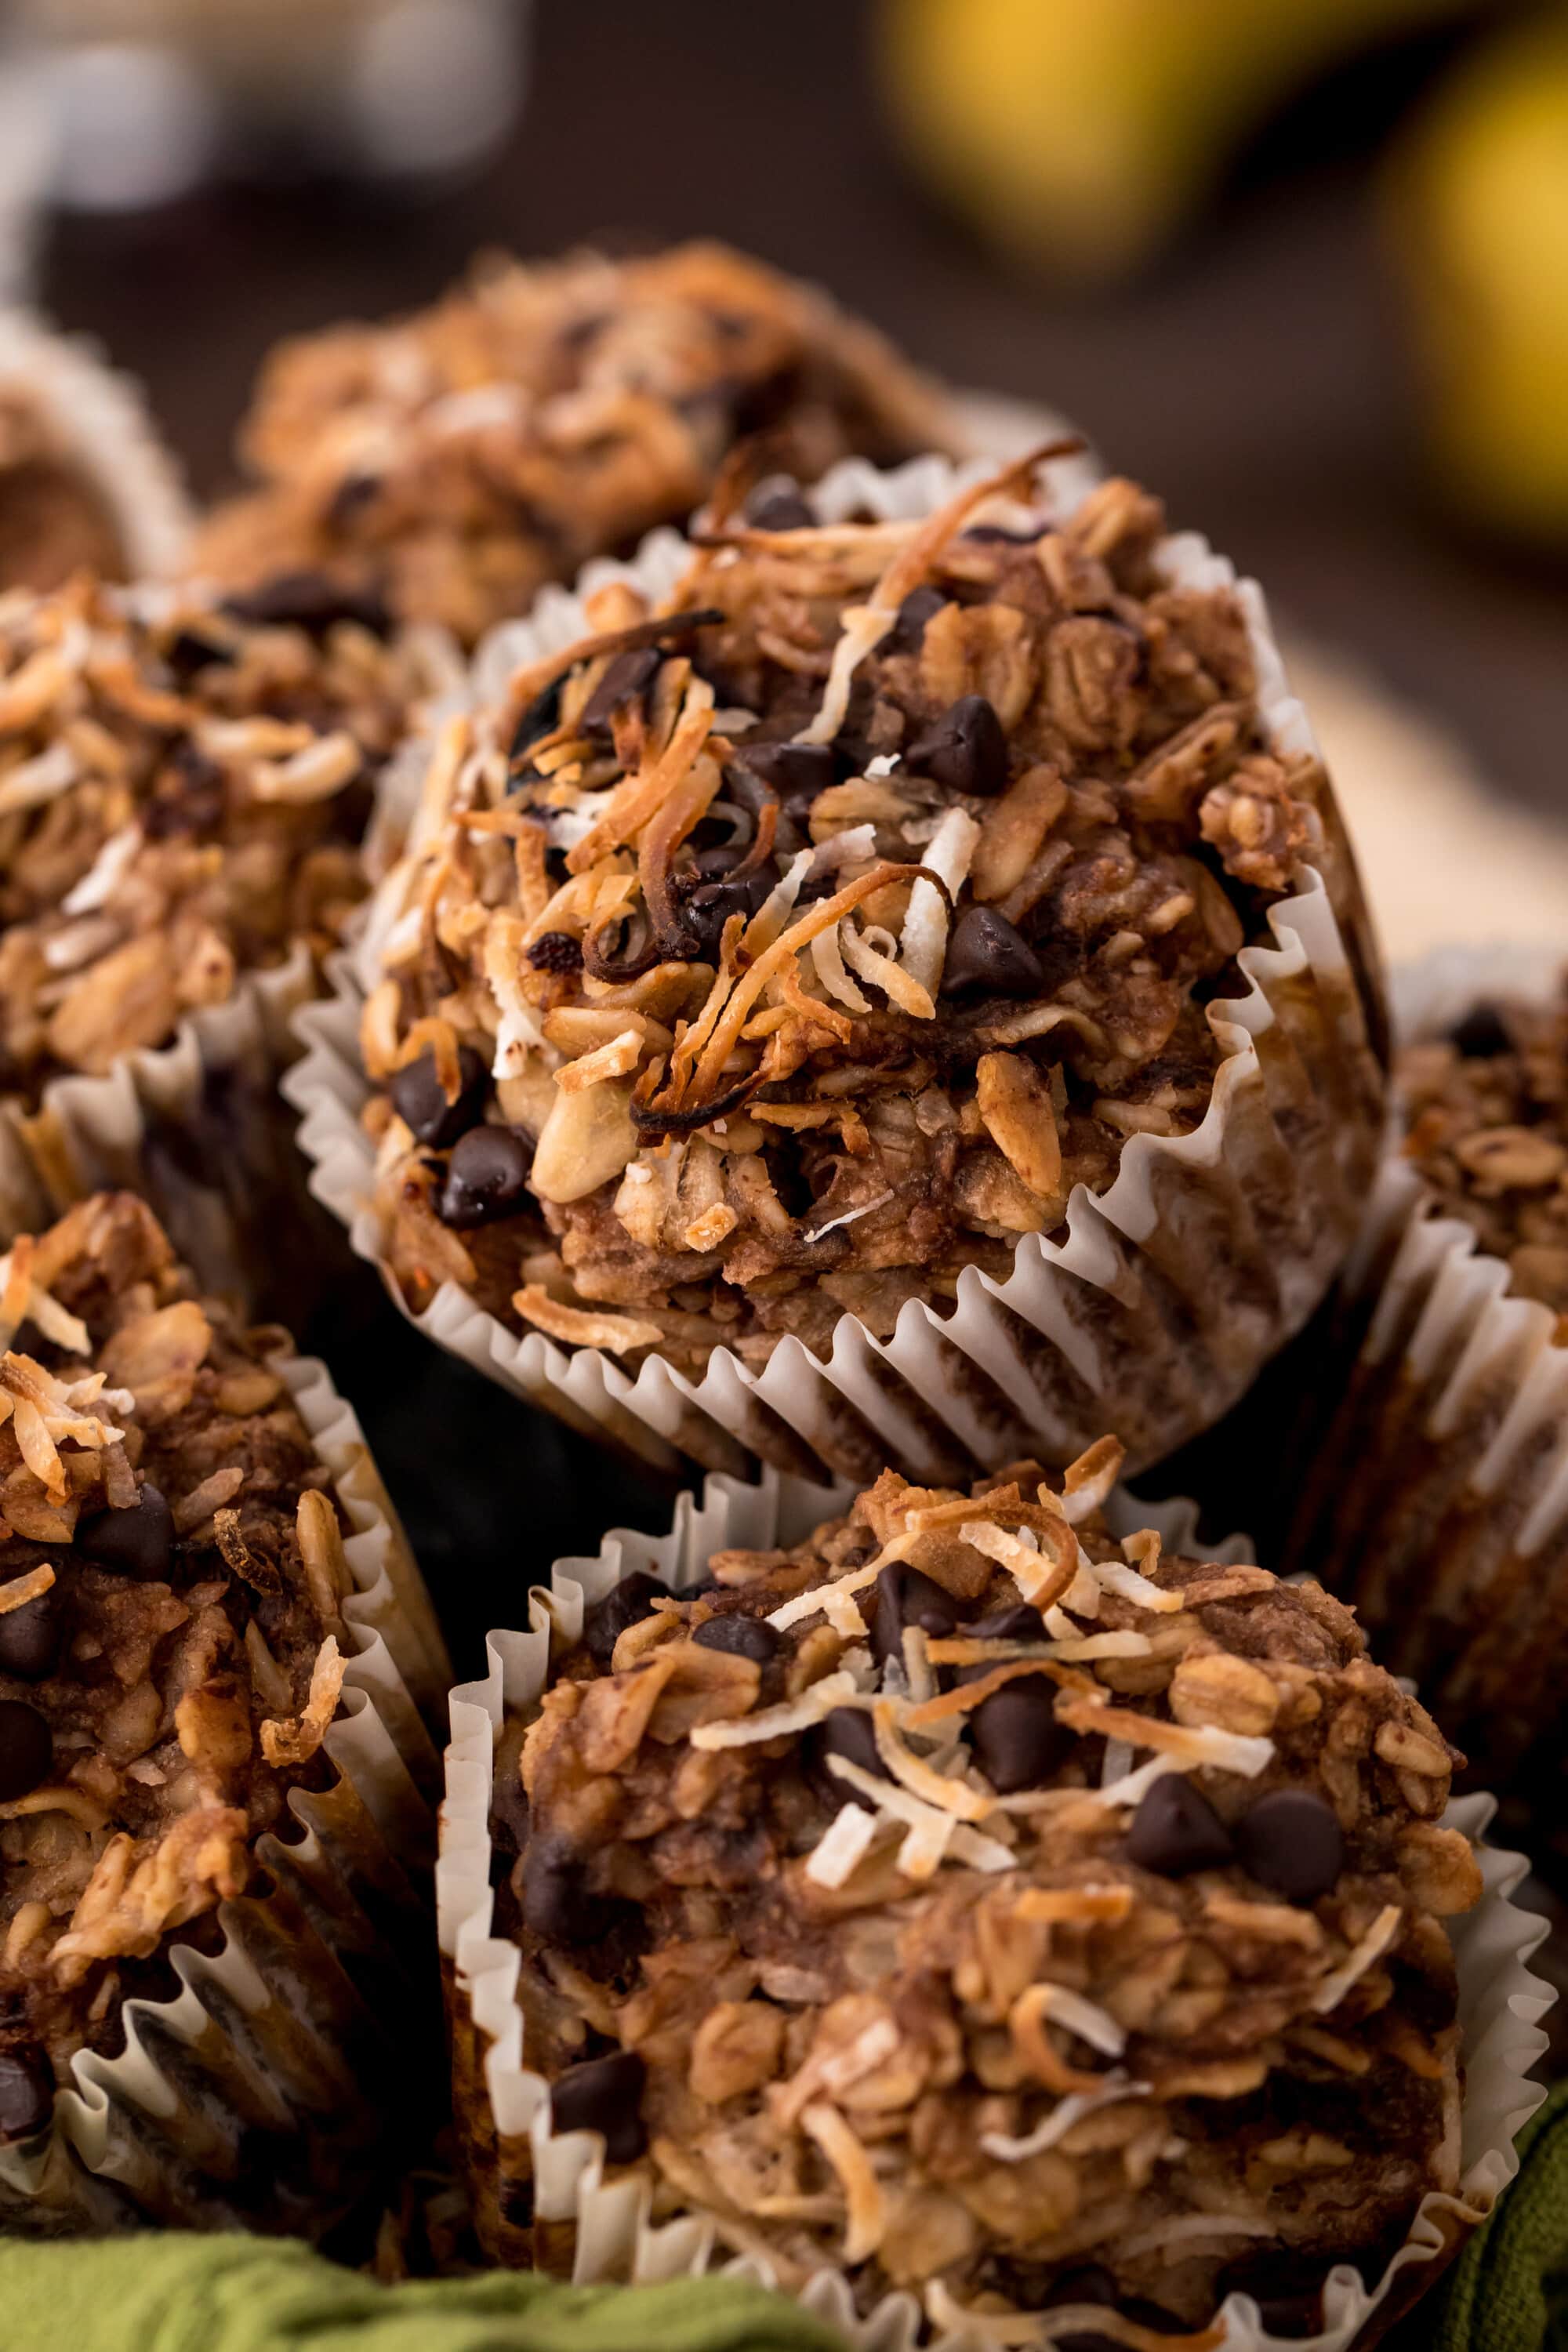 5D4B7797 - What The Fudge - Katie Higgins - Oatmeal Cupcakes To Go - HIGH RES